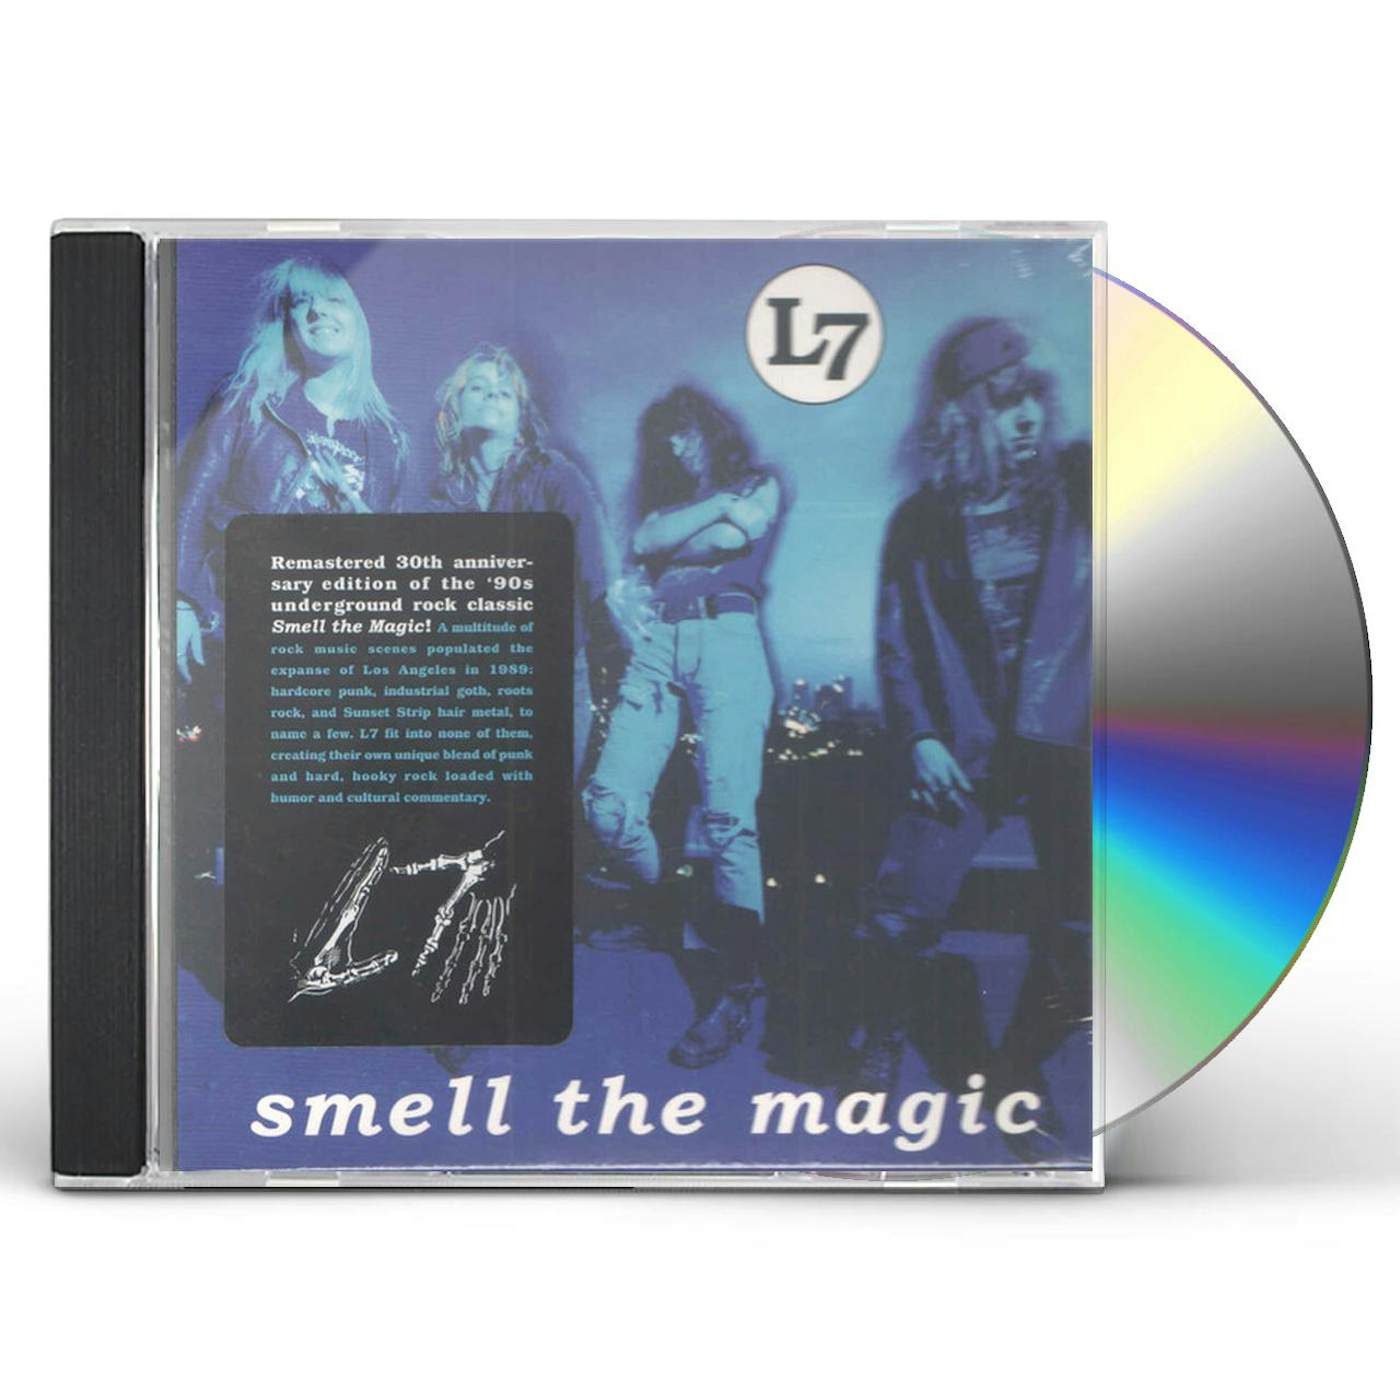 L7 SMELL THE MAGIC (REMASTERED) CD